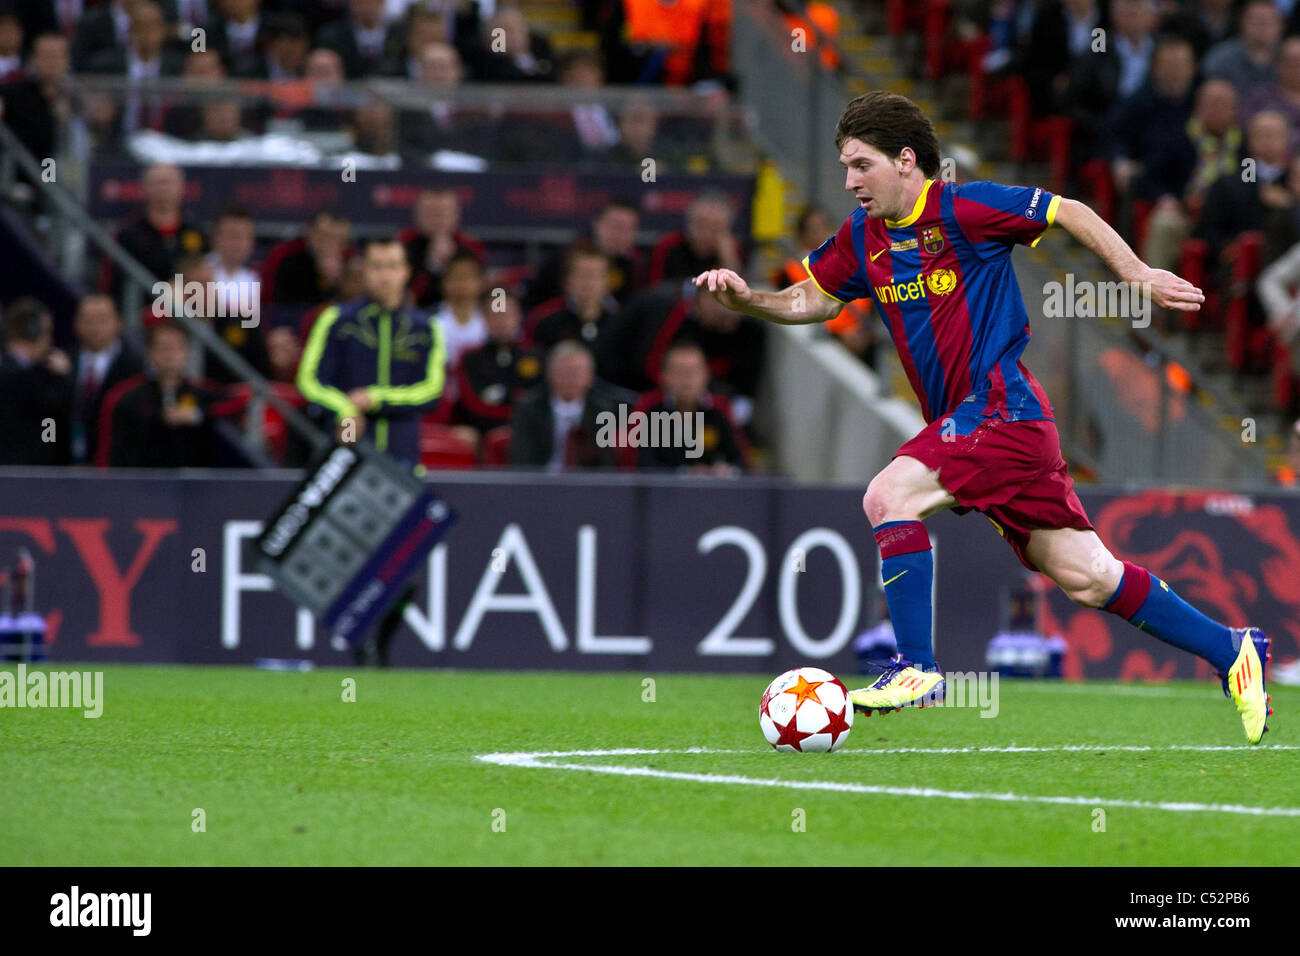 Lionel Messi of Barcelona in action during the 2011 UEFA Champions League final match Stock Photo